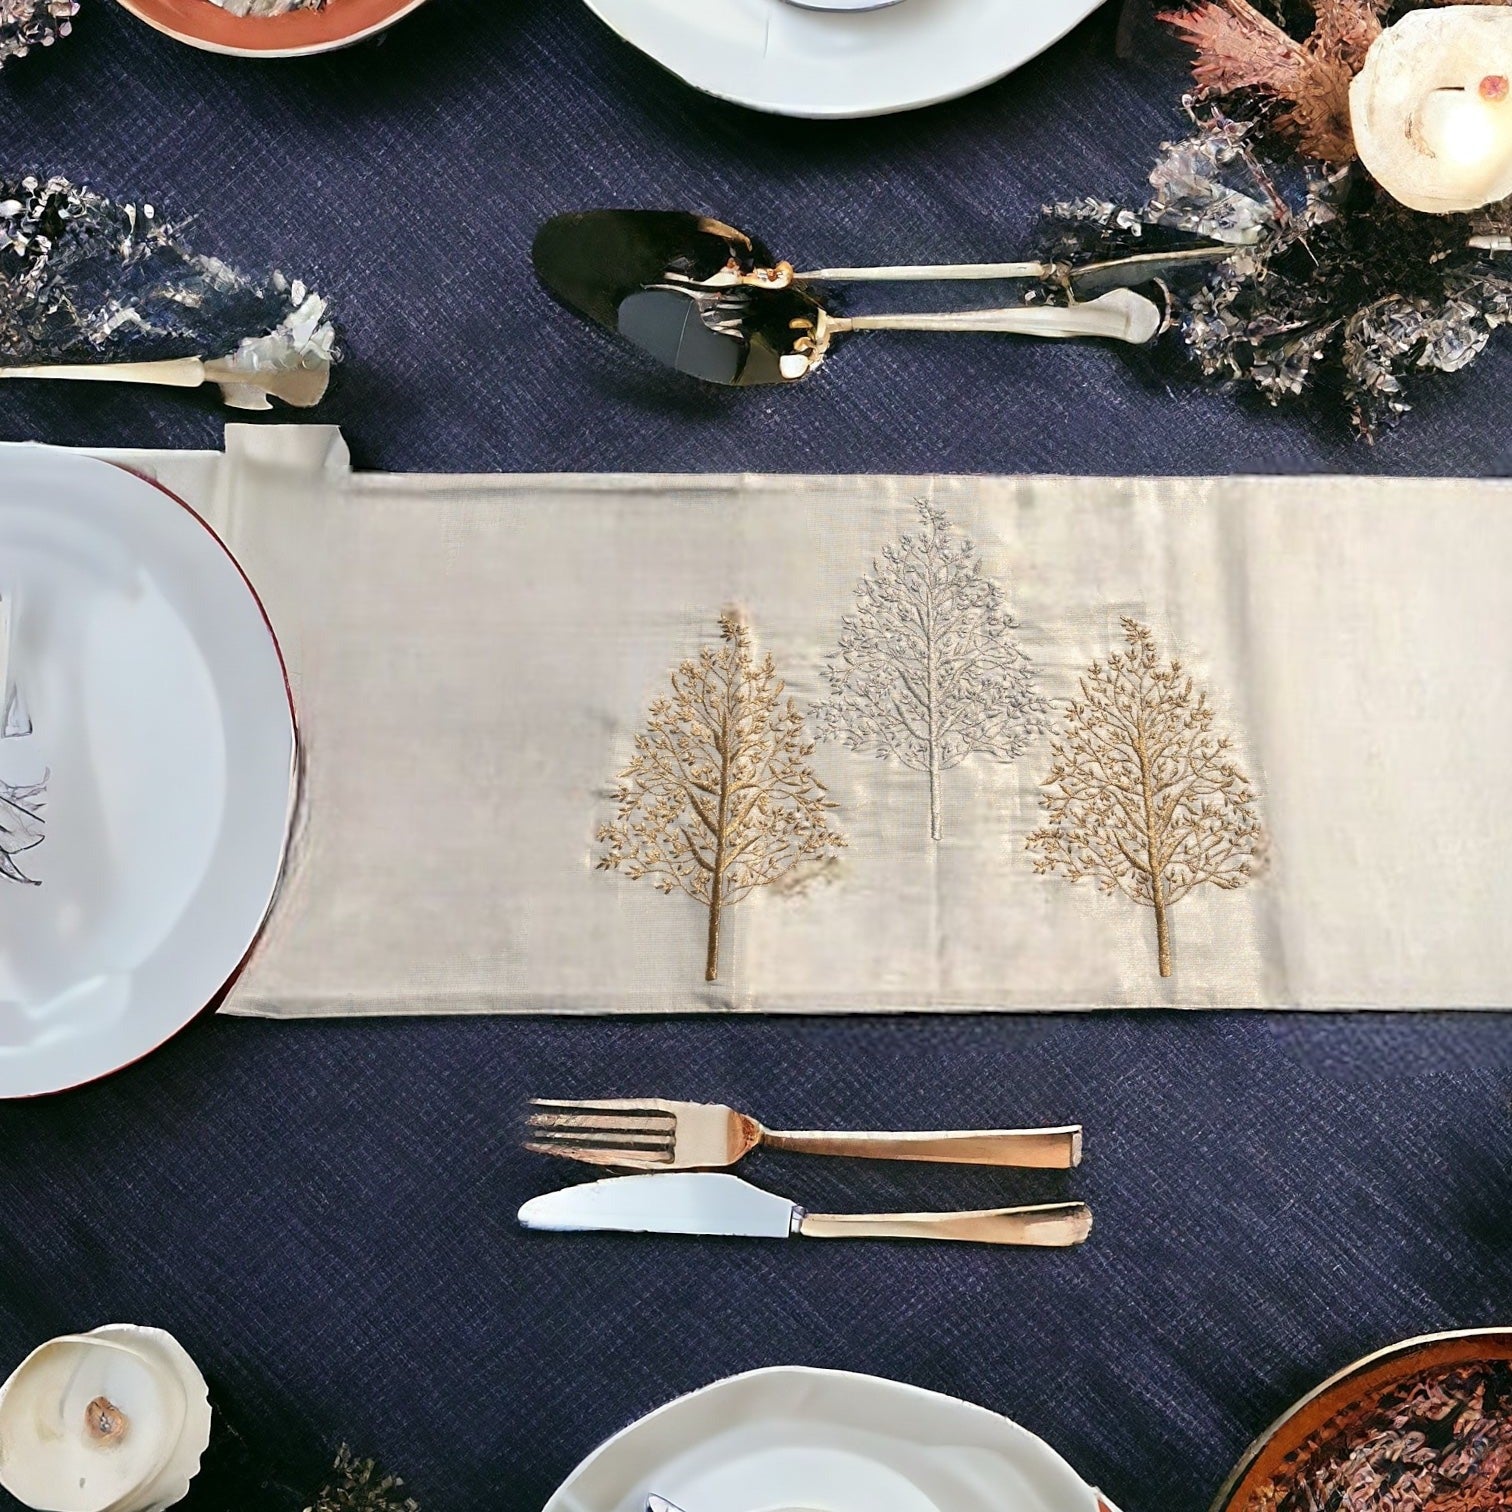 Luxury table runner with gold and silver embroidered work  placed on a dining table